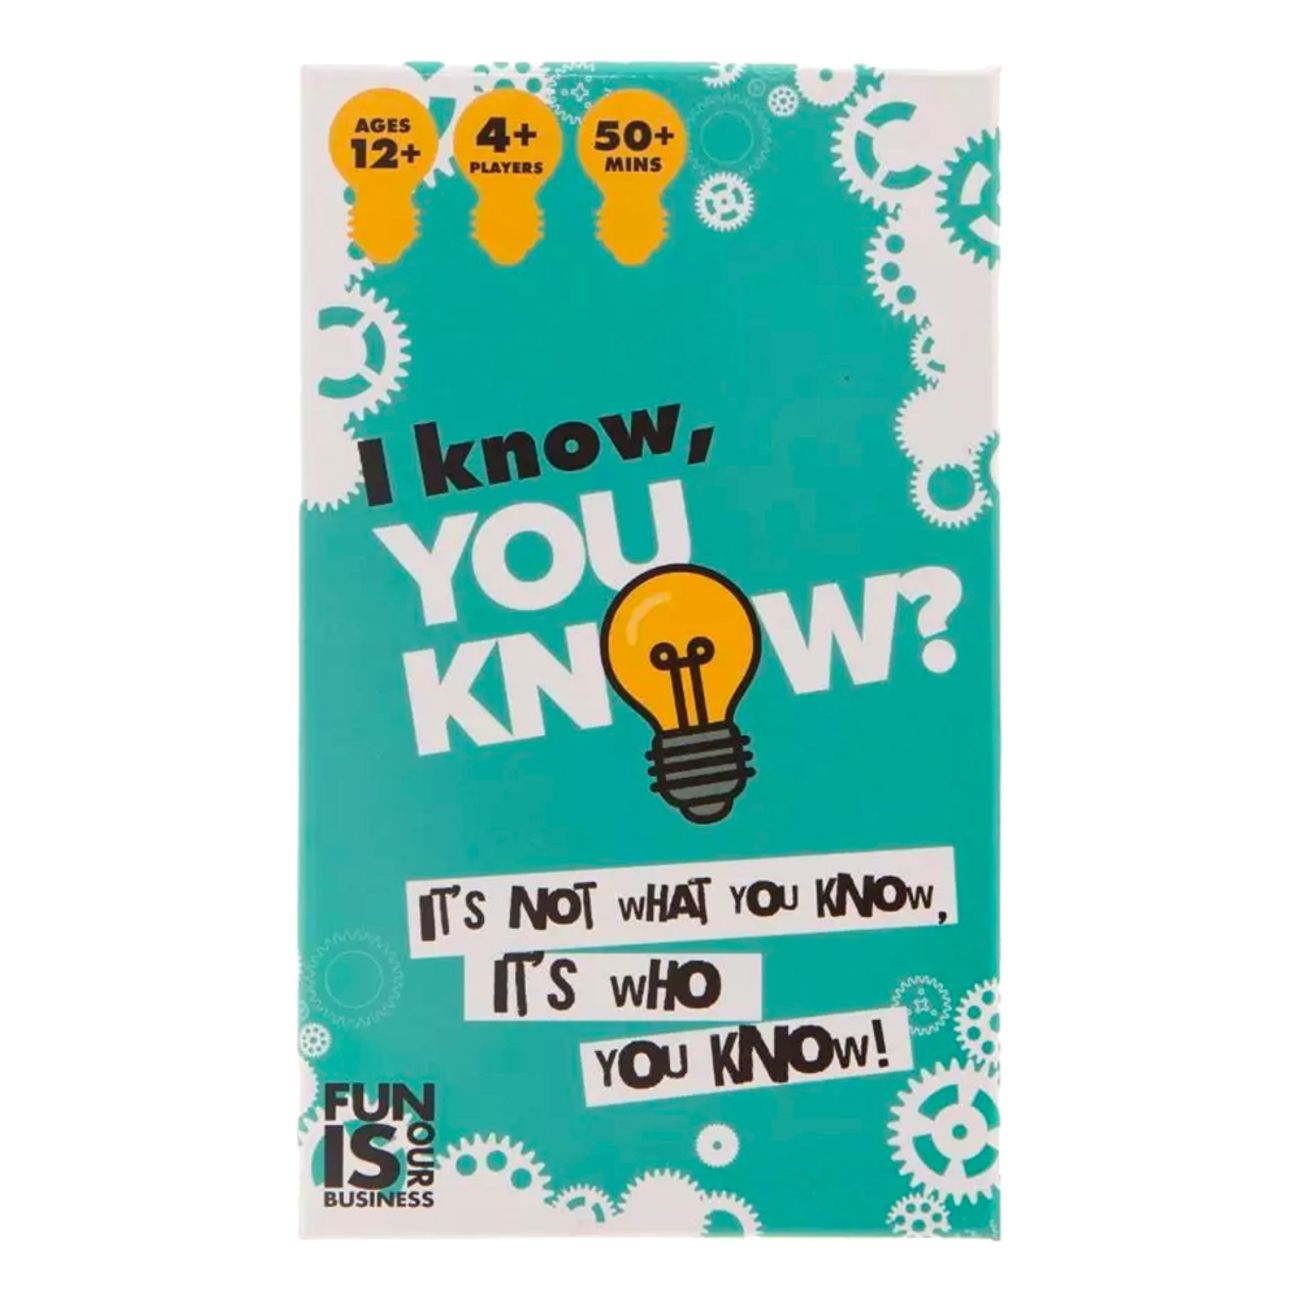 i-know-you-know-fragespel-81498-1